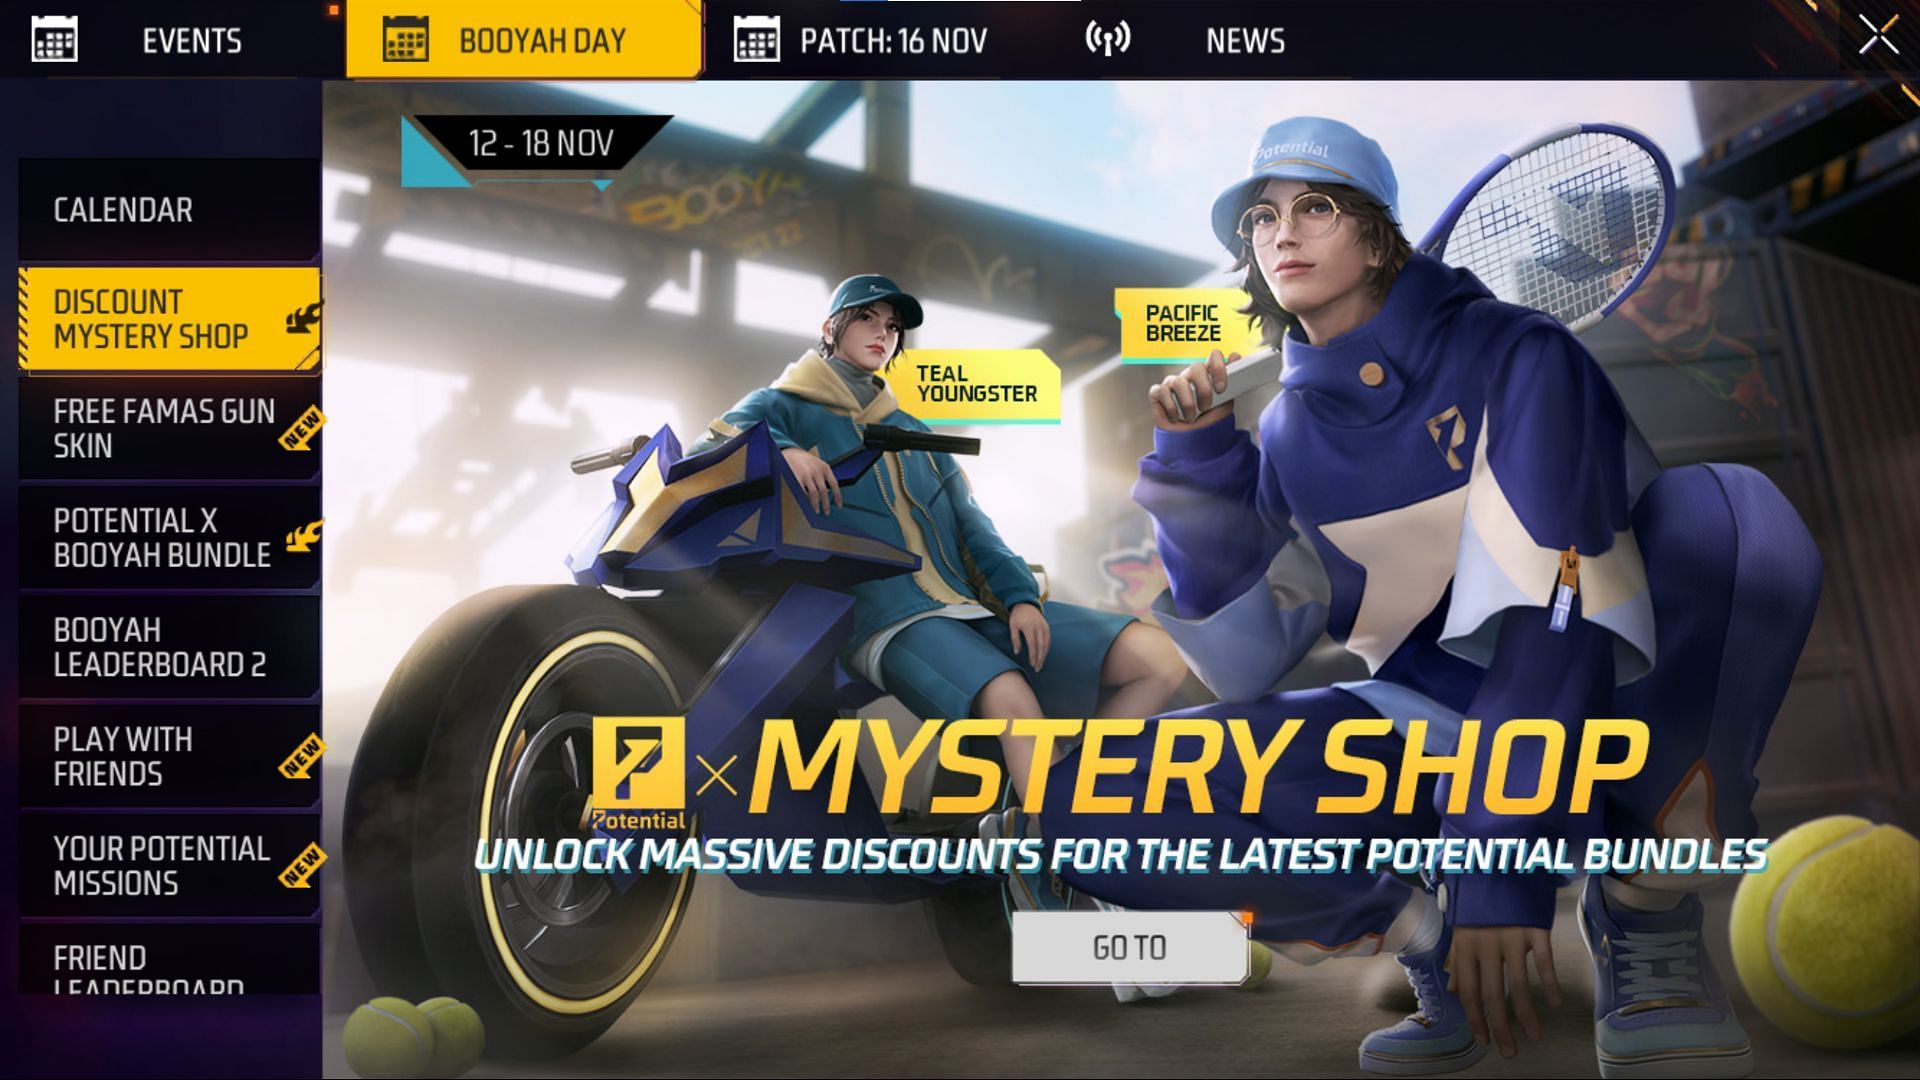 Discount Mystery Shop provides bundles at a discounted price (Image via Garena)